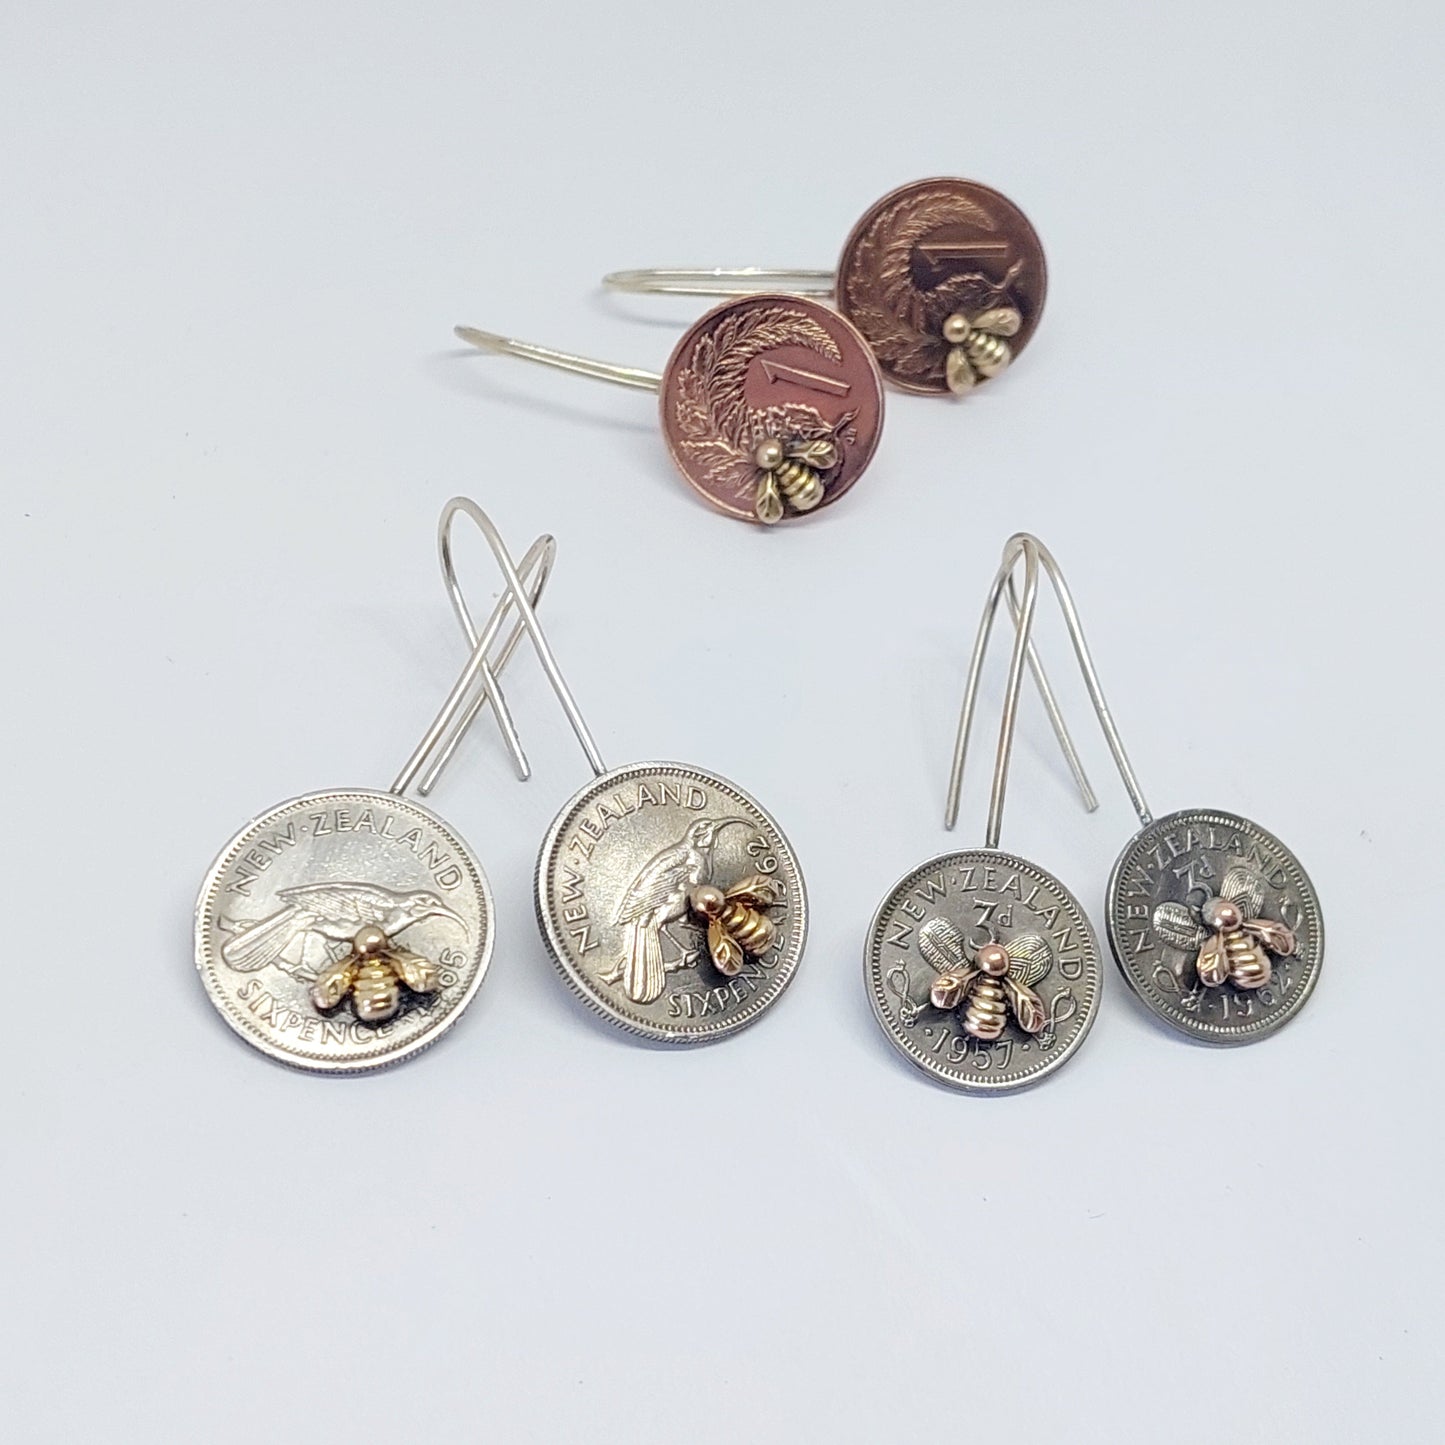 NEW!! Re-minted Artisan Coin Earrings with Tiny Bees - Sixpence